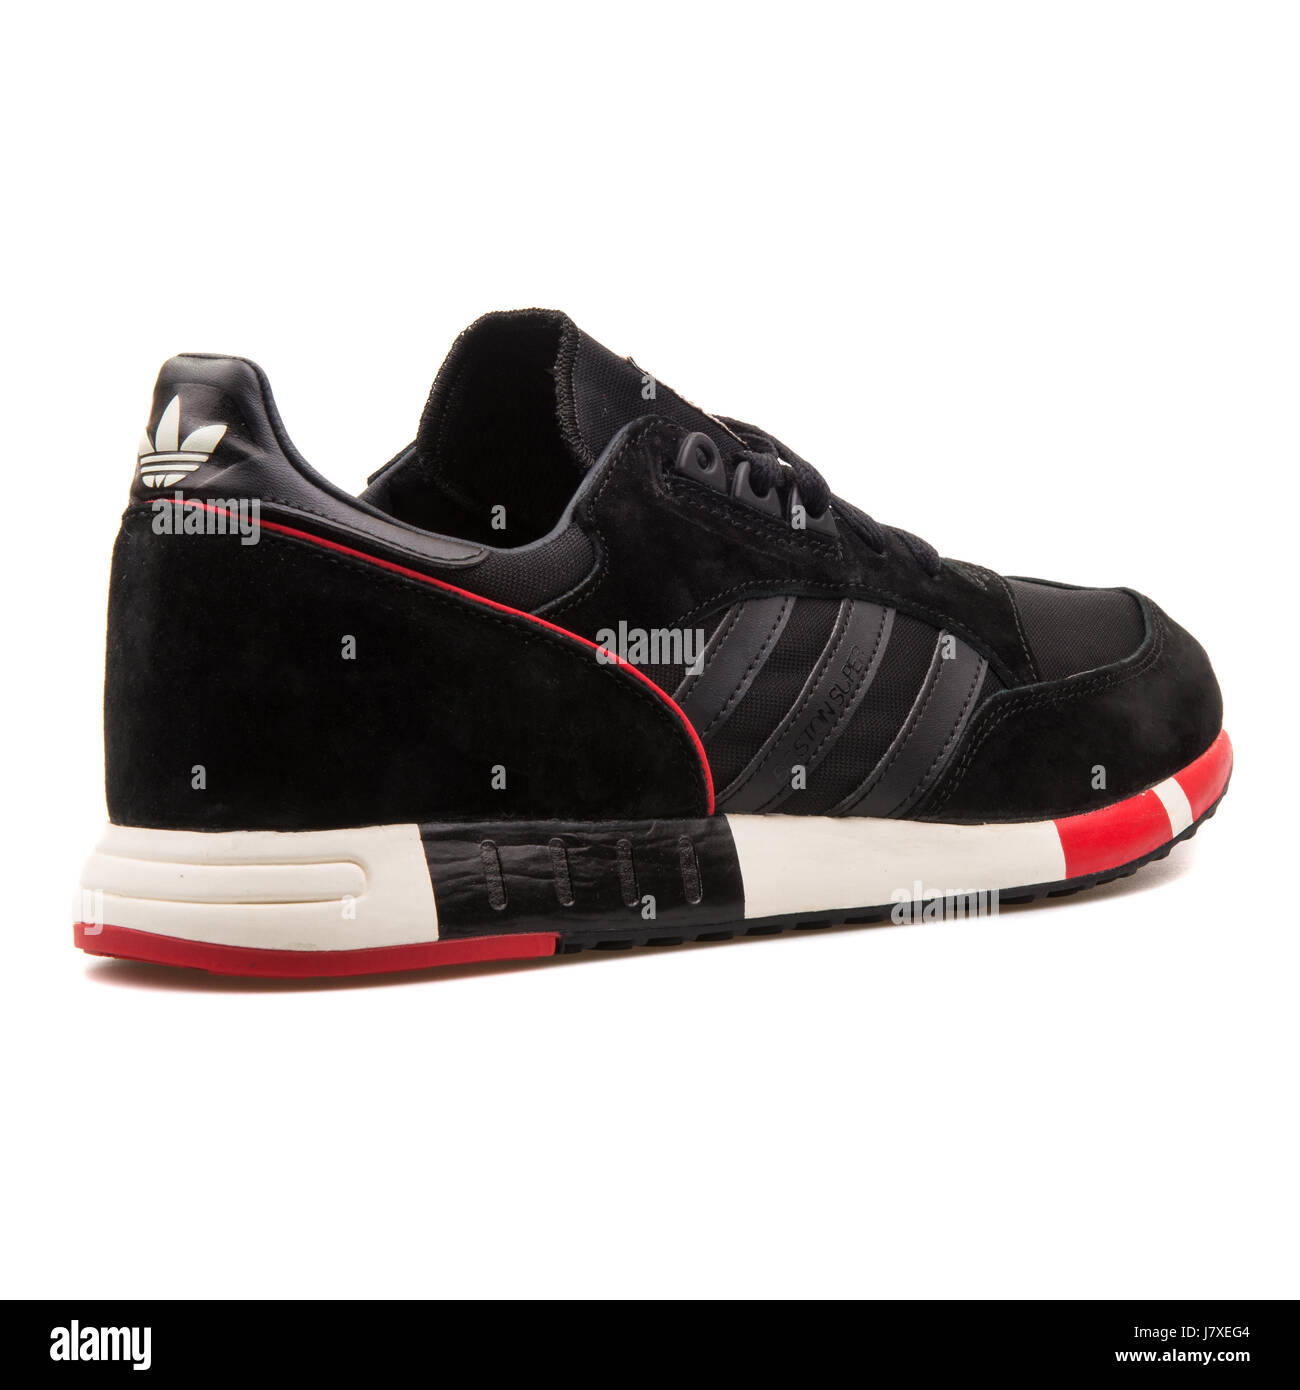 Adidas Boston Super Men's Black with Red Sneakers - S81432 Stock Photo -  Alamy